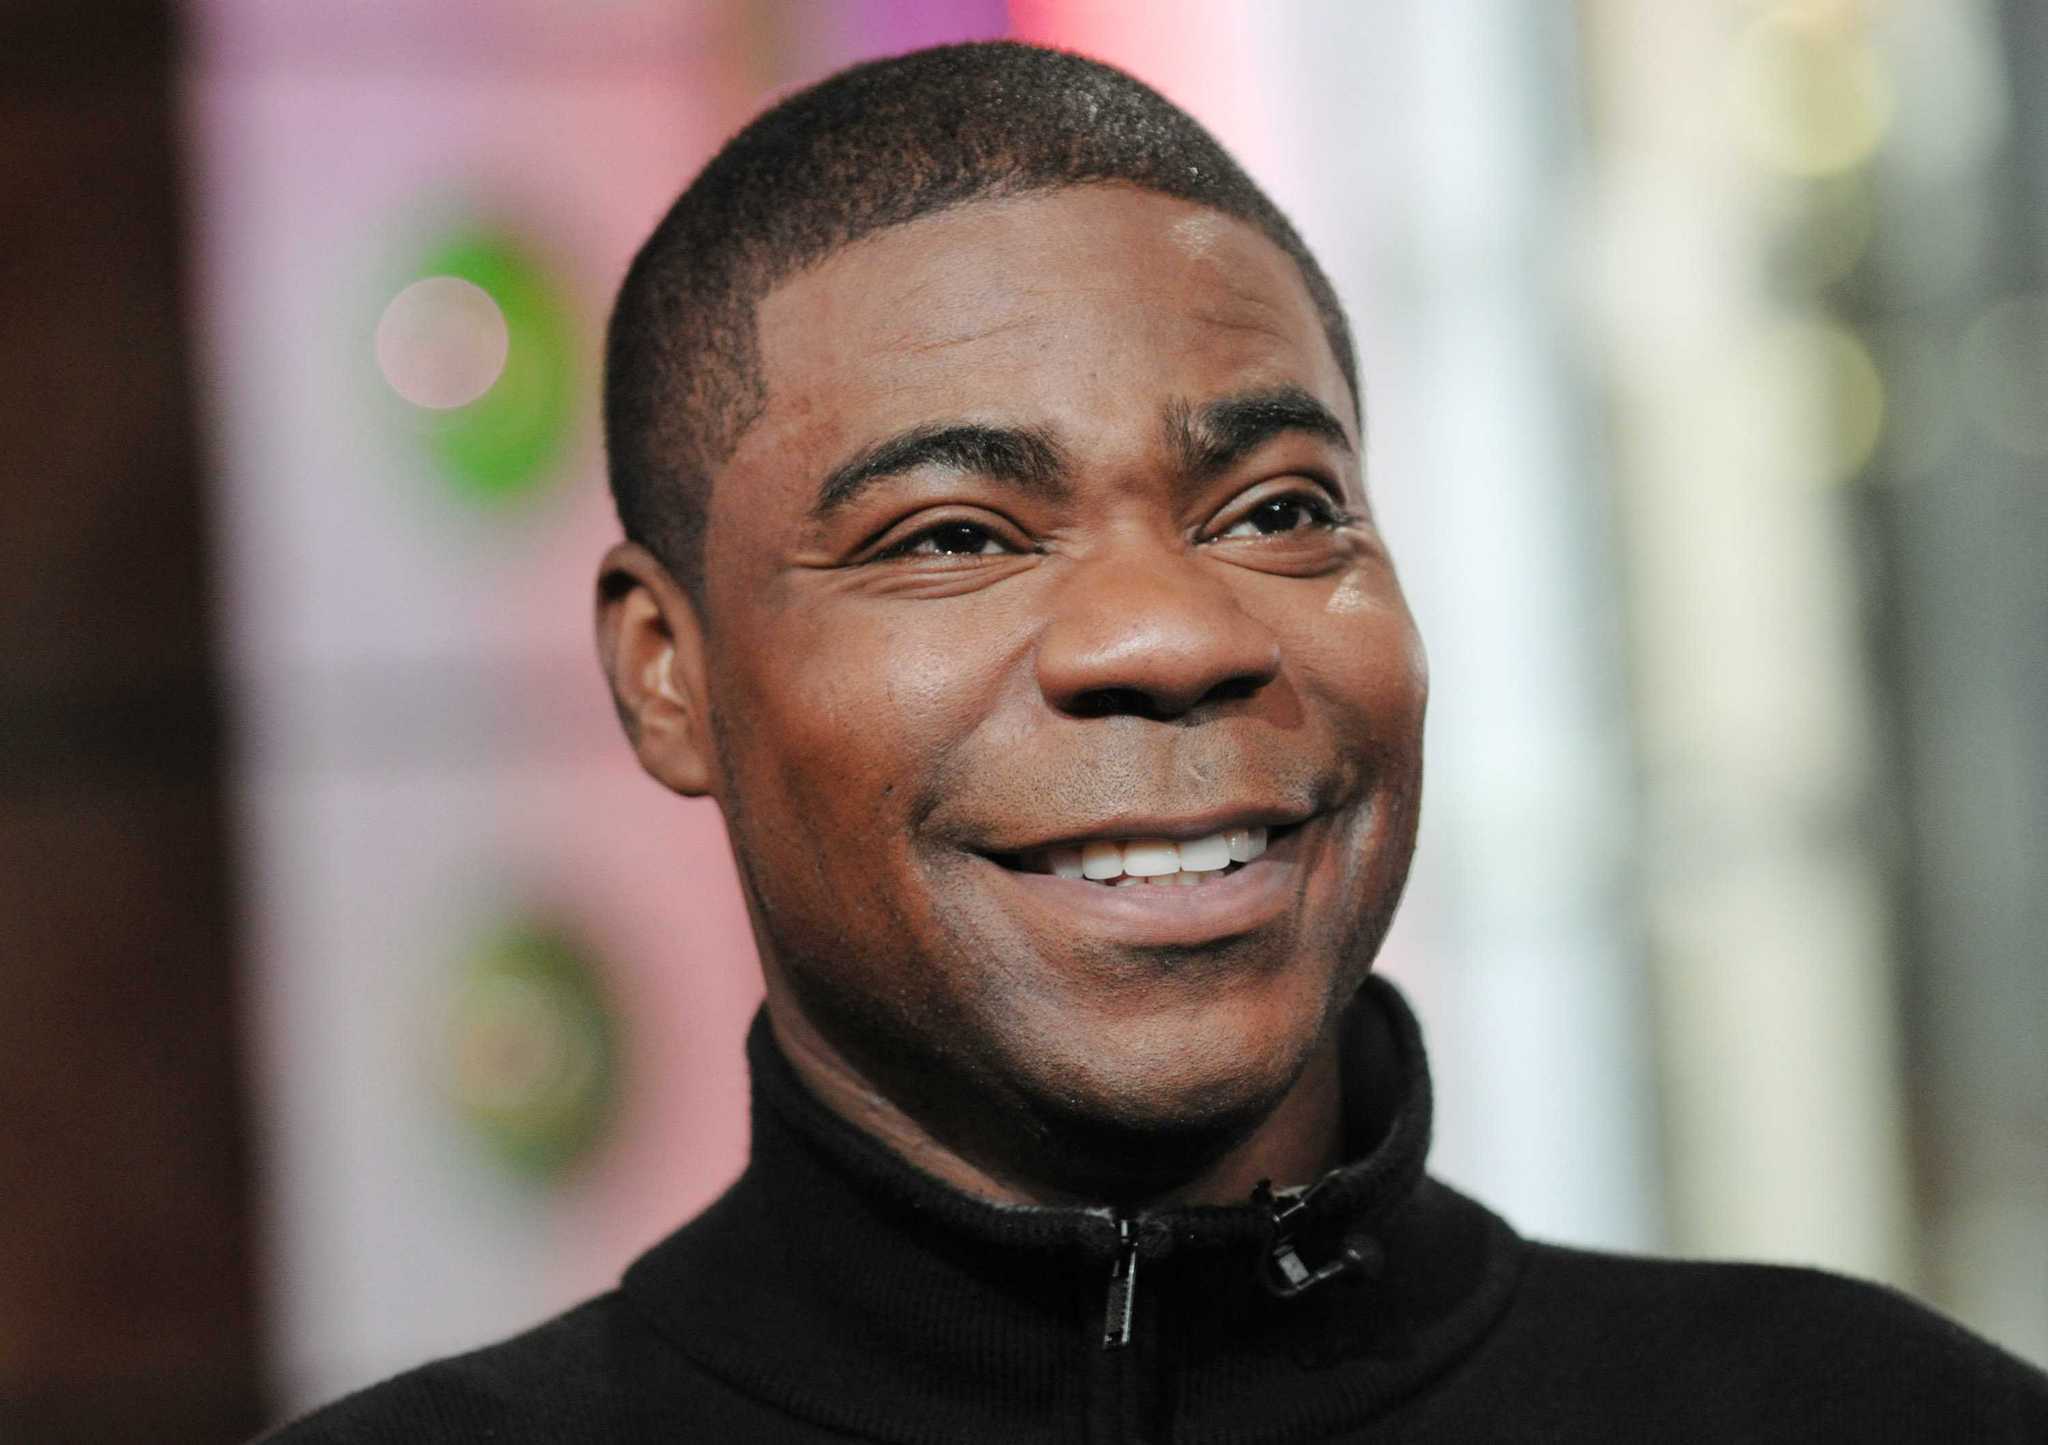 Actor Tracy Morgan is recovering in a New Jersey hospital after almost being killed in a highway accident involving a tractor-trailer.